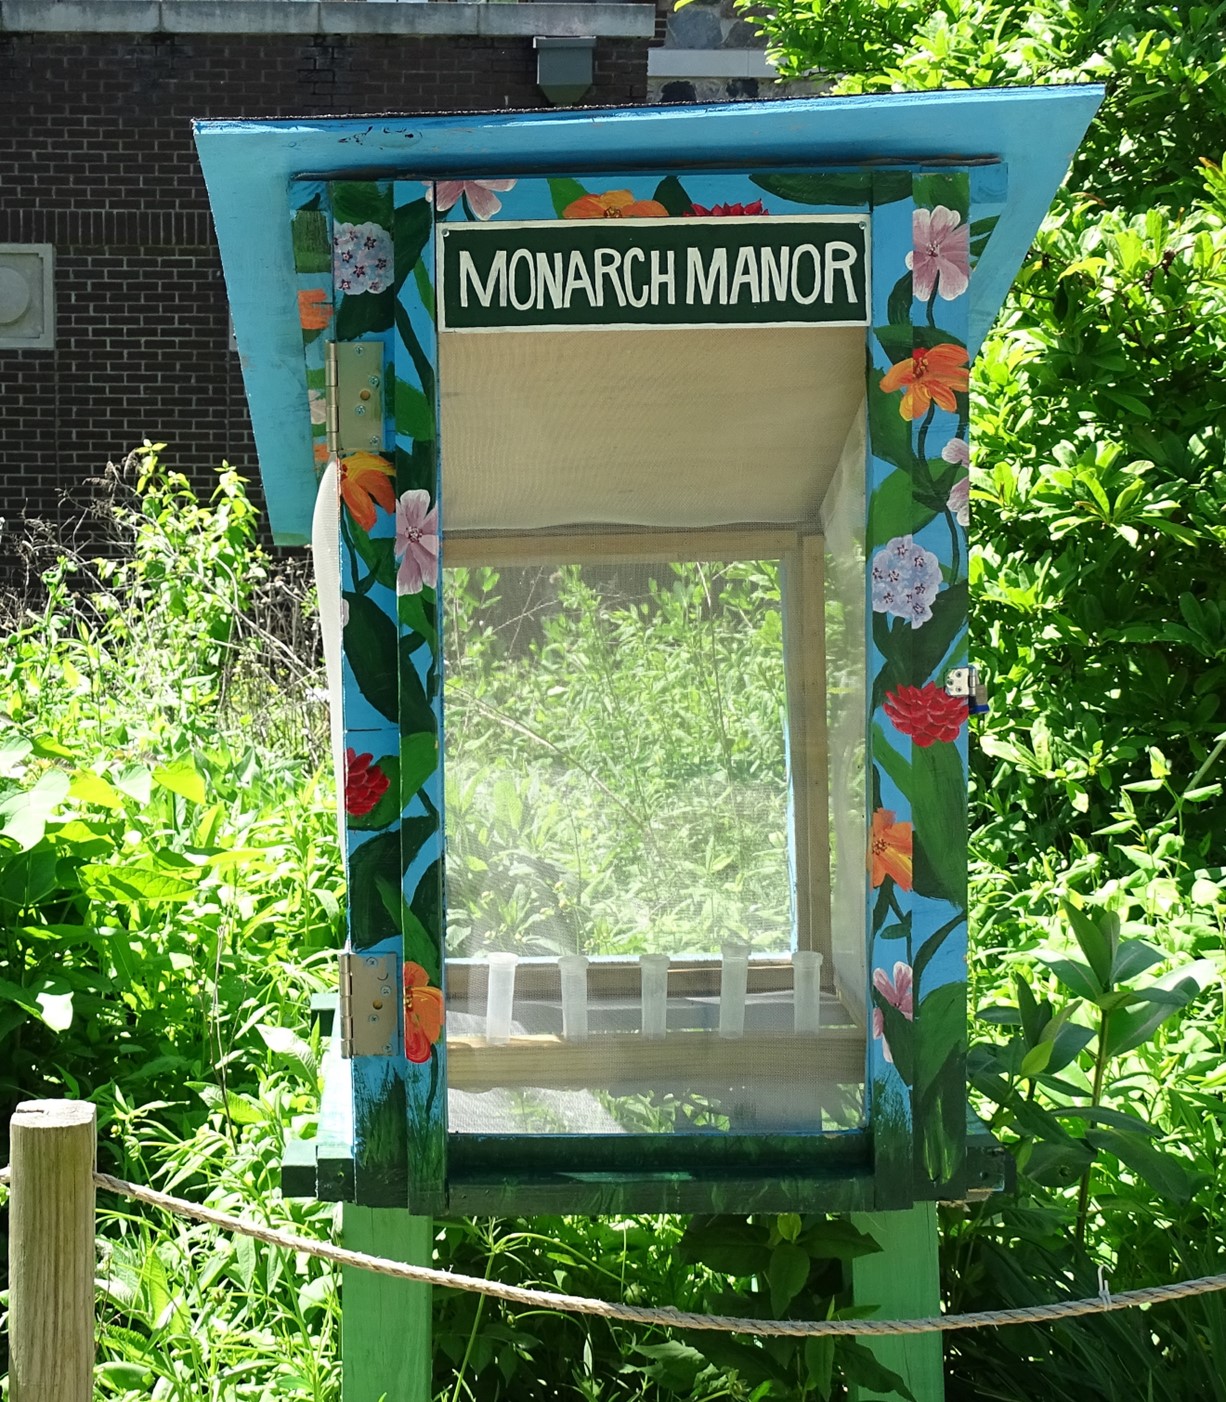 Monarch butterfly box at Miller Park Zoo to help raise monarchs in a protected area for release into the wild